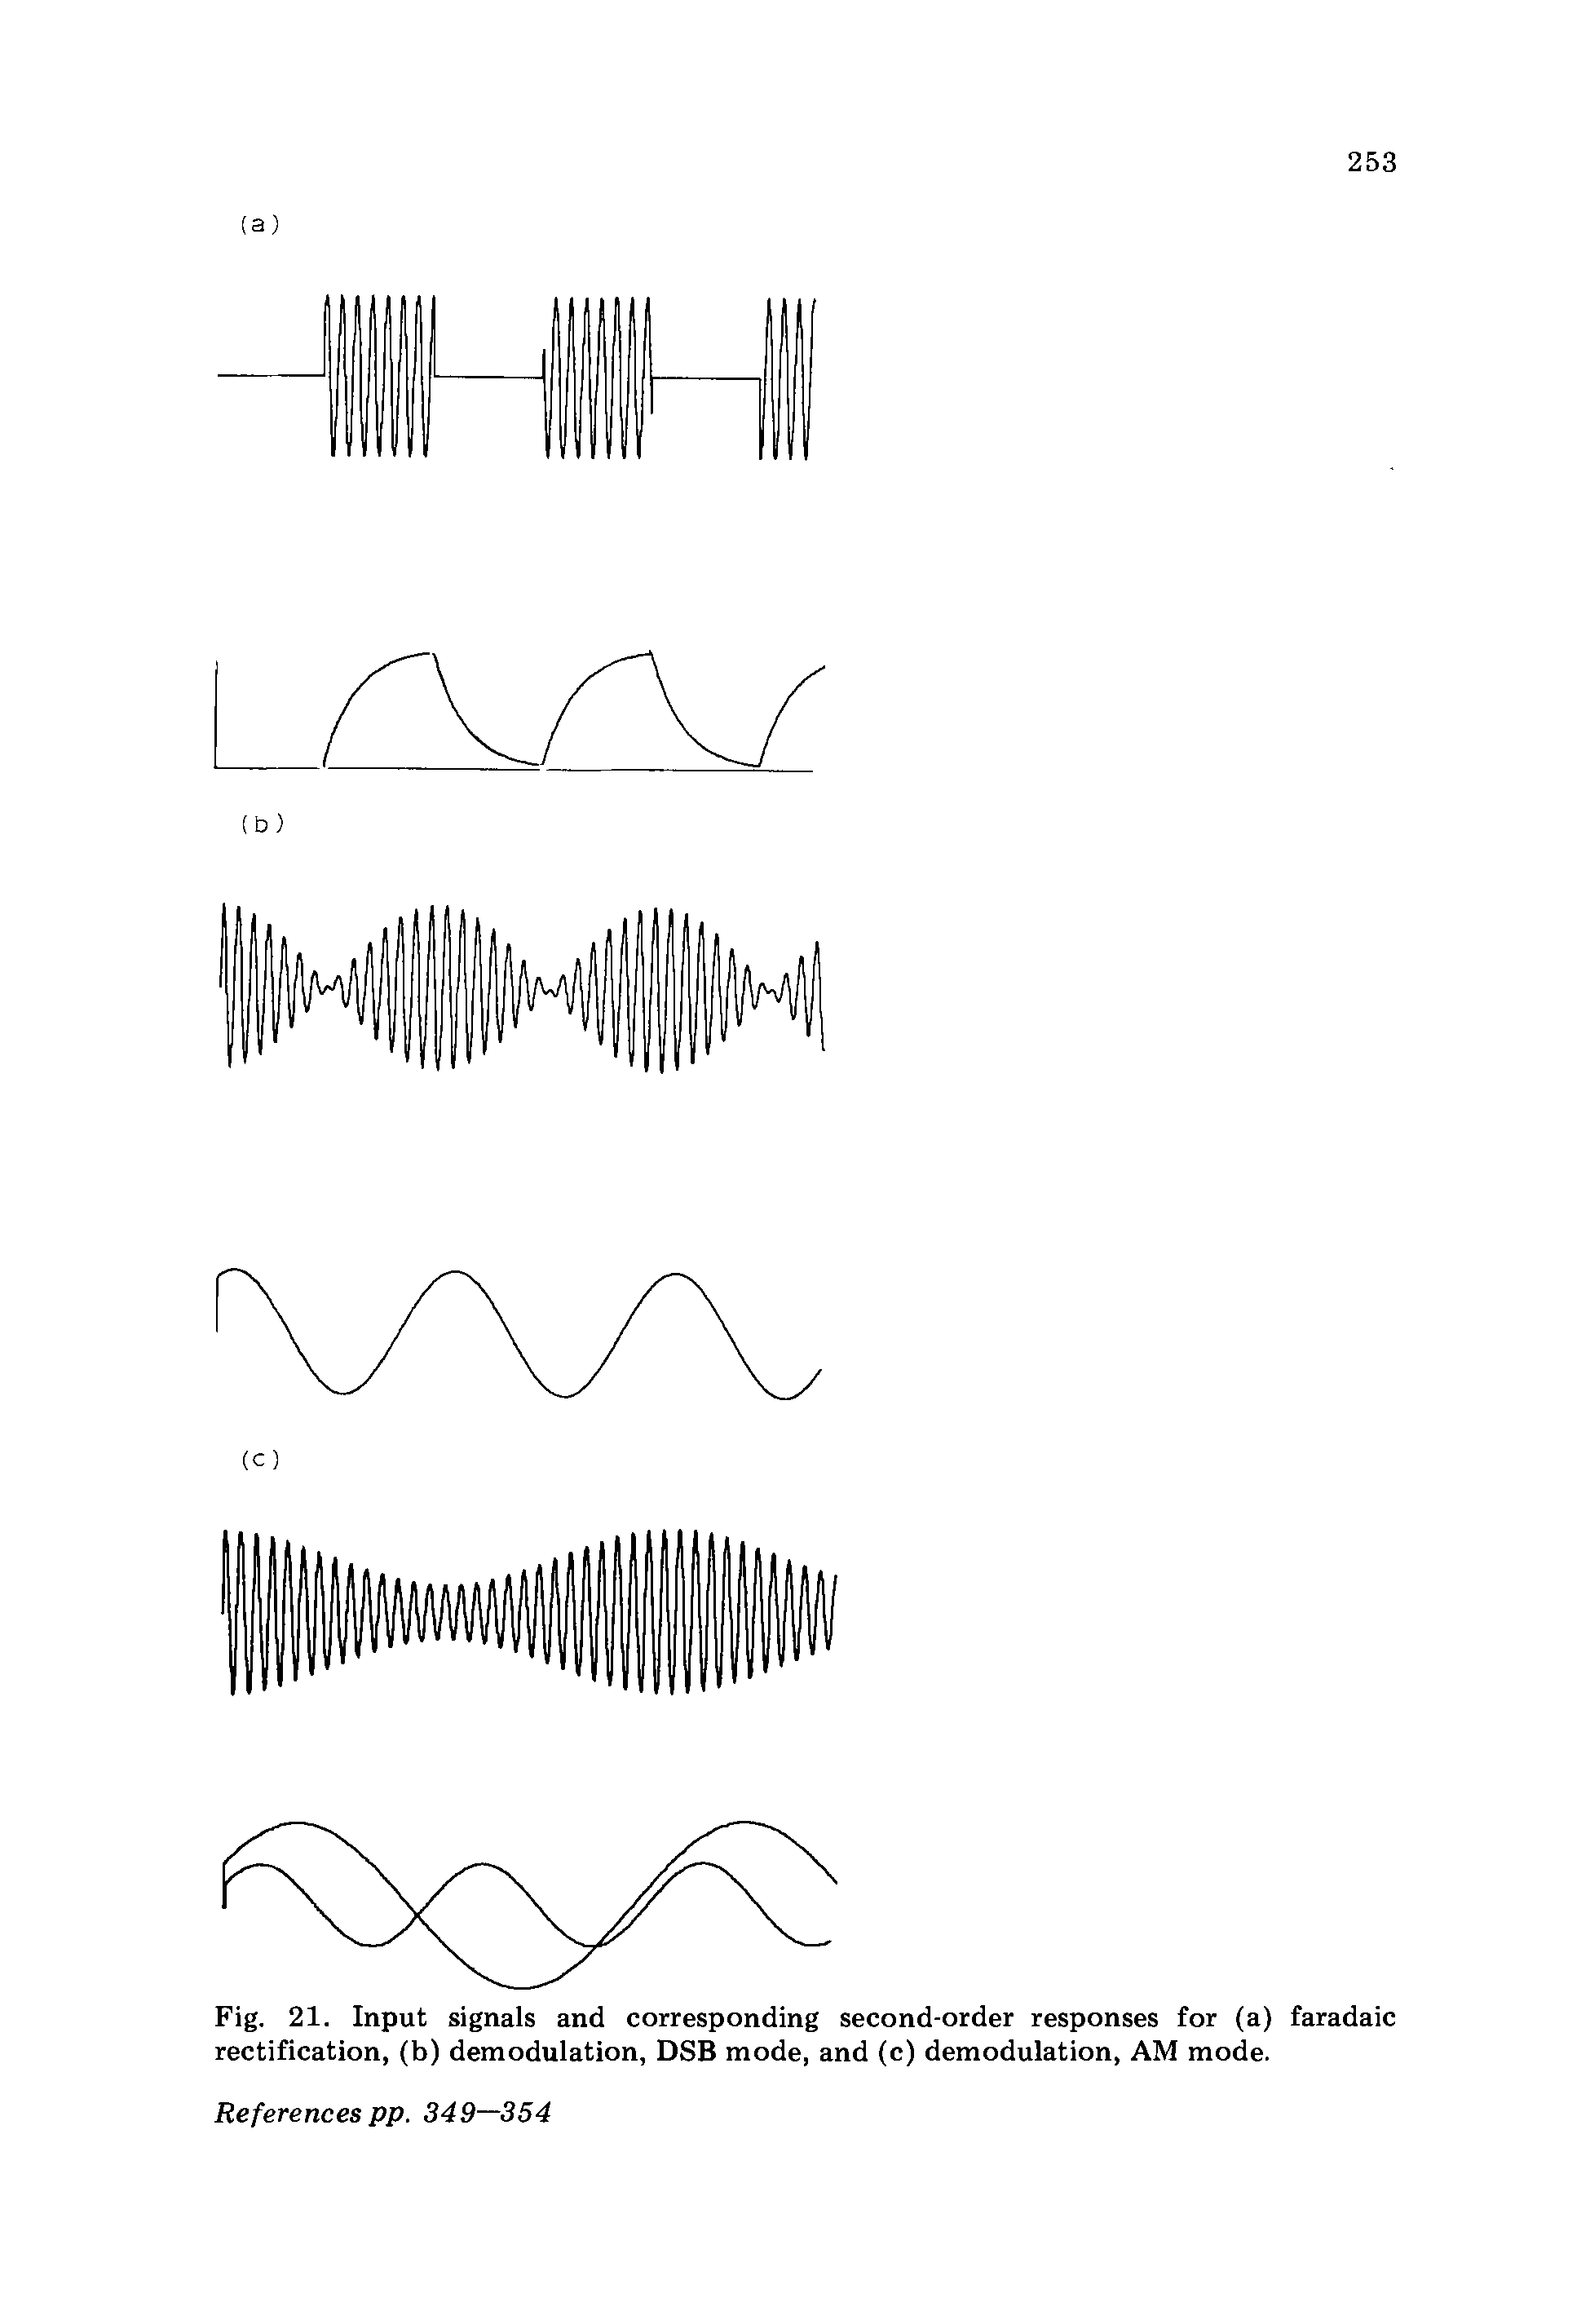 Fig. 21. Input signals and corresponding second-order responses for (a) rectification, (b) demodulation, DSB mode, and (c) demodulation, AM mode.